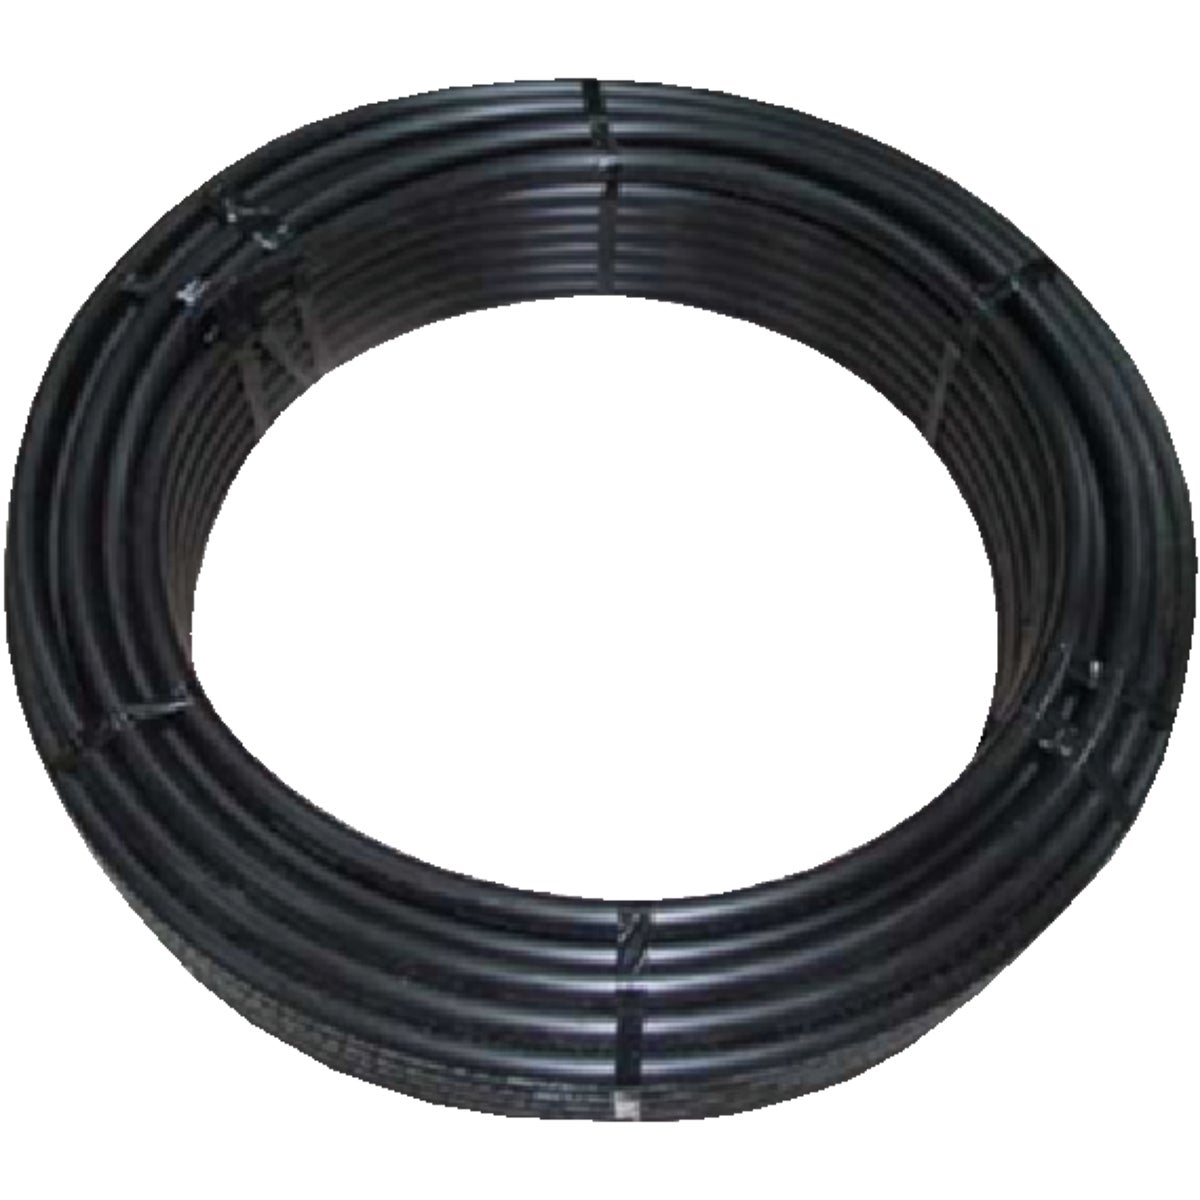 Cresline 3/4 In. X 400 Ft. HD200 (SIDR-9) Polyethylene Pipe